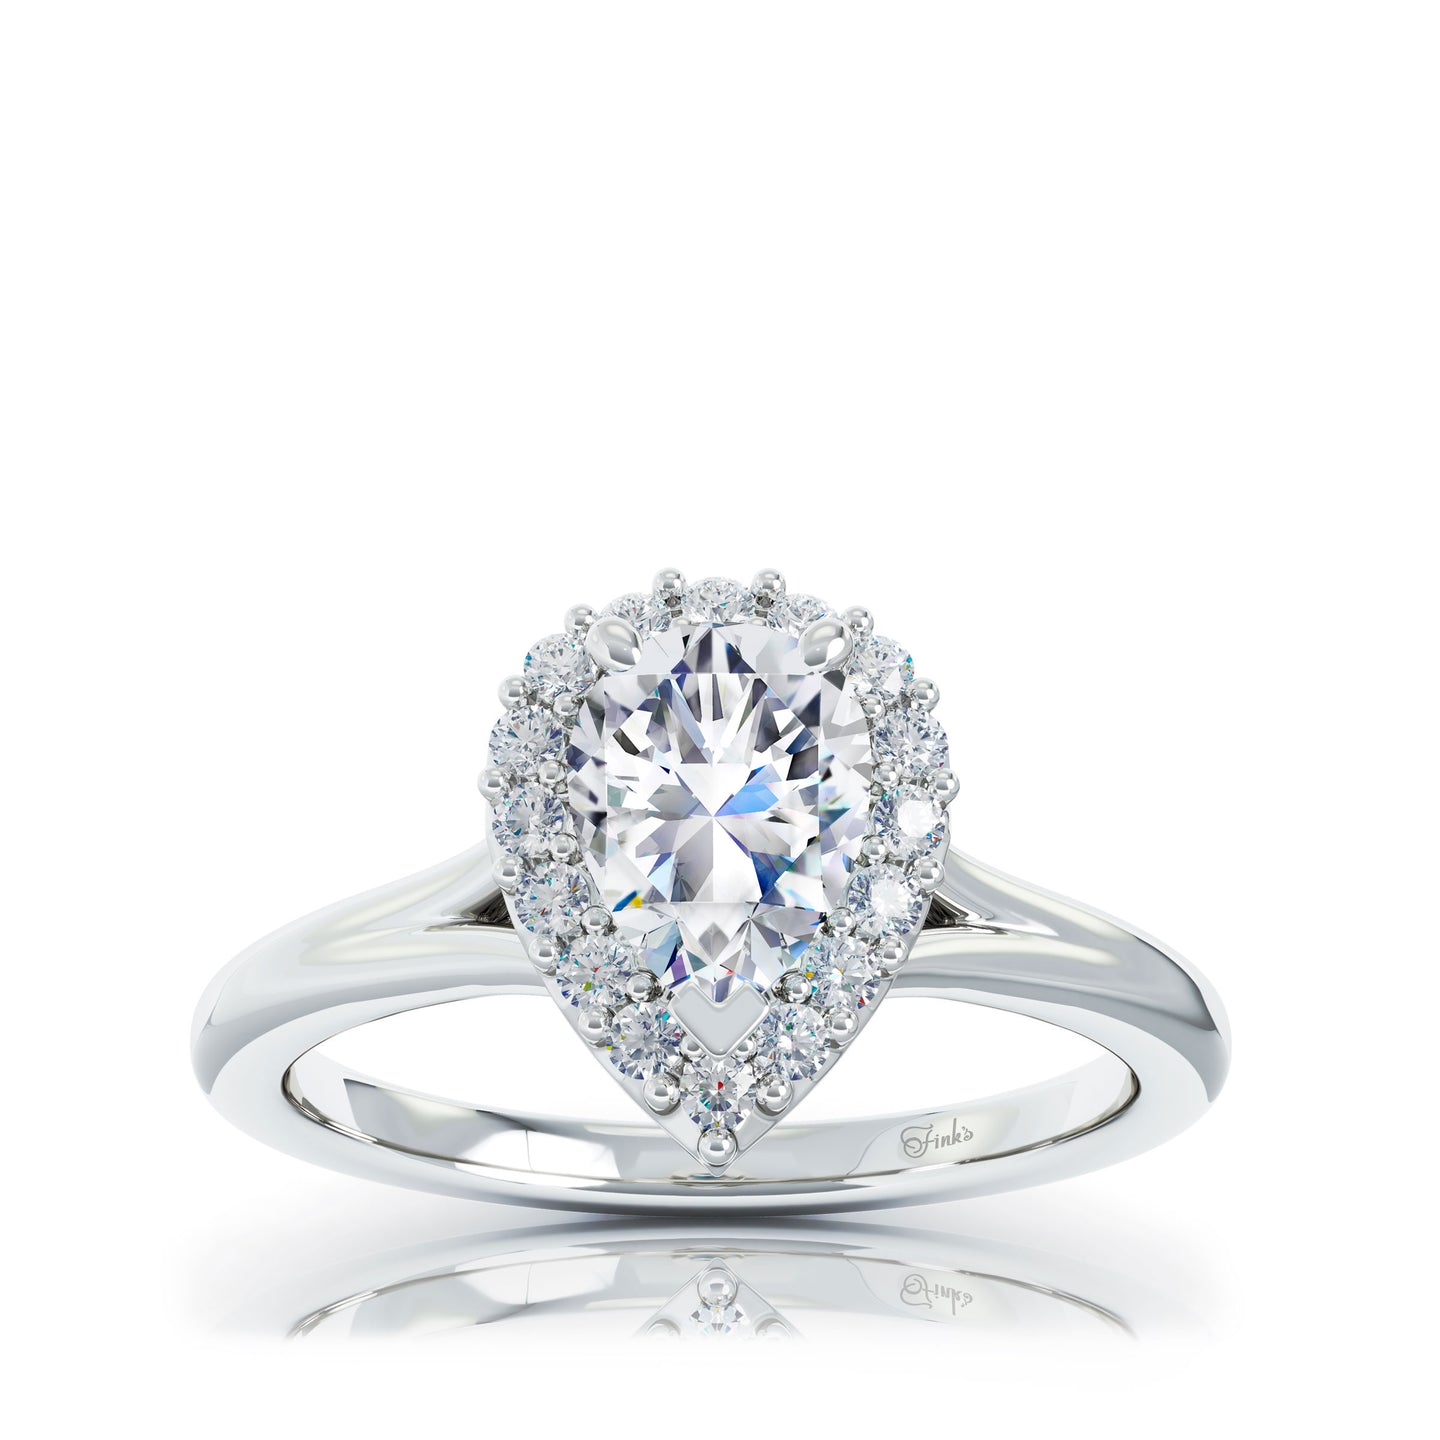 The Studio Collection Pear Diamond Halo and Classic Shank Engagement Ring